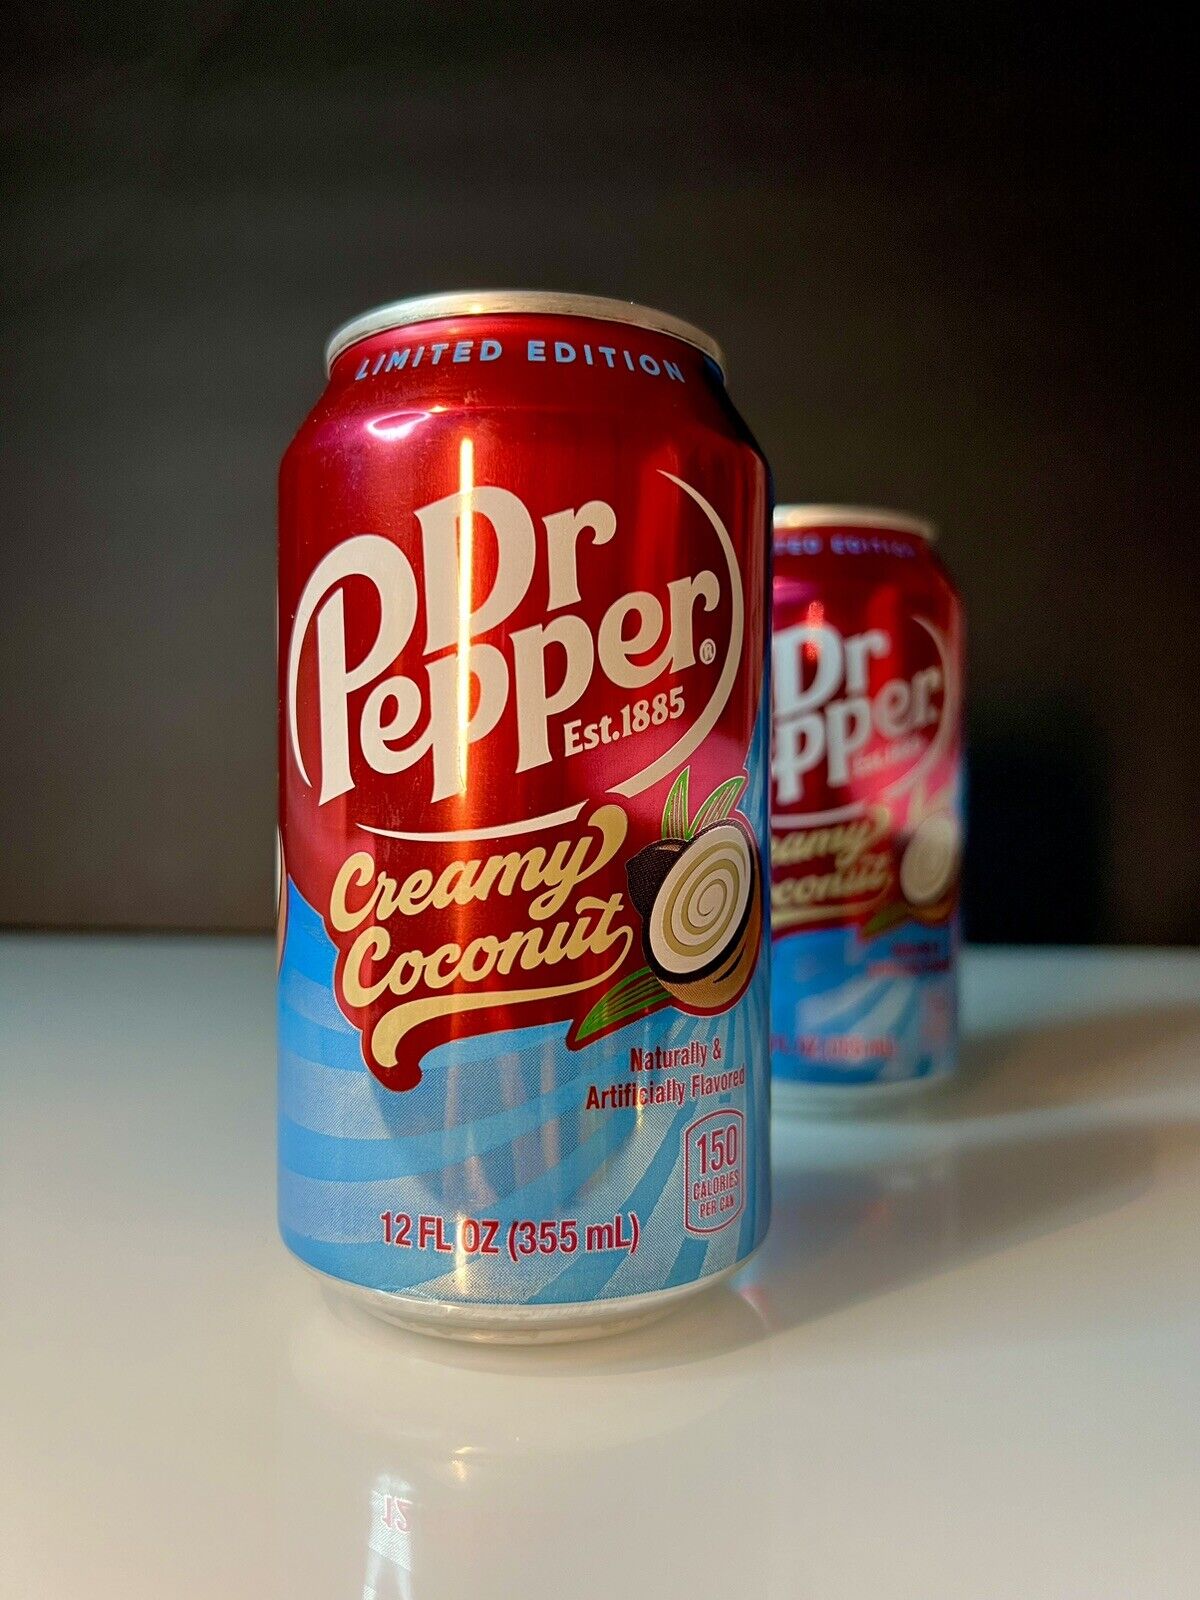 🔵New Limited Edition Rare Dr. Pepper Creamy Coconut Flavored Soda (2 Cans)